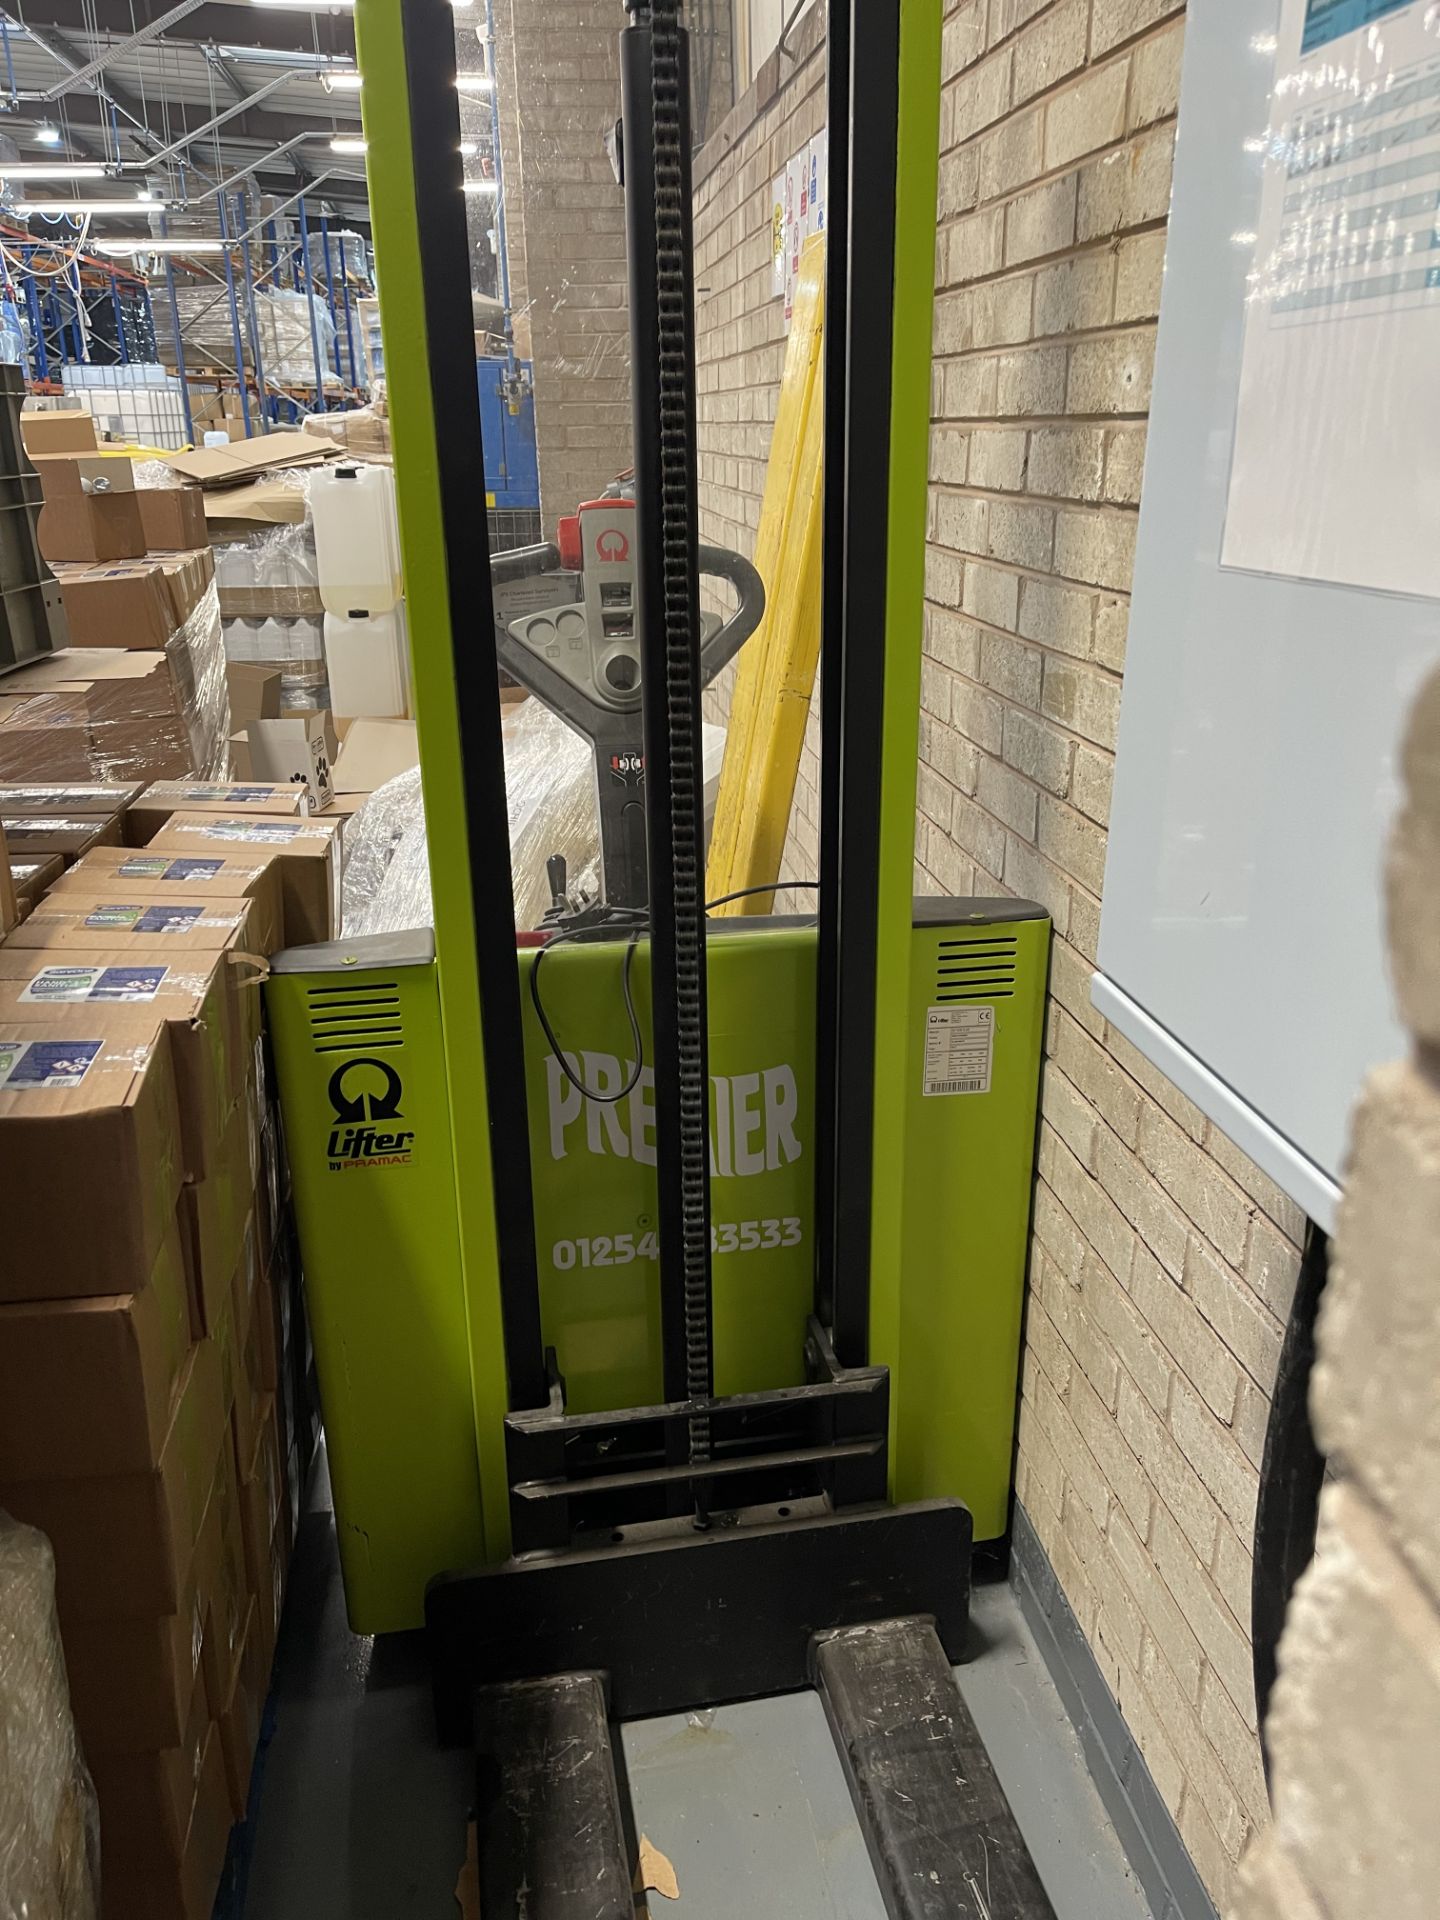 Lifter electric pallet stacker | Model: GX12/29 plus | YOM: 2013 - Image 4 of 4